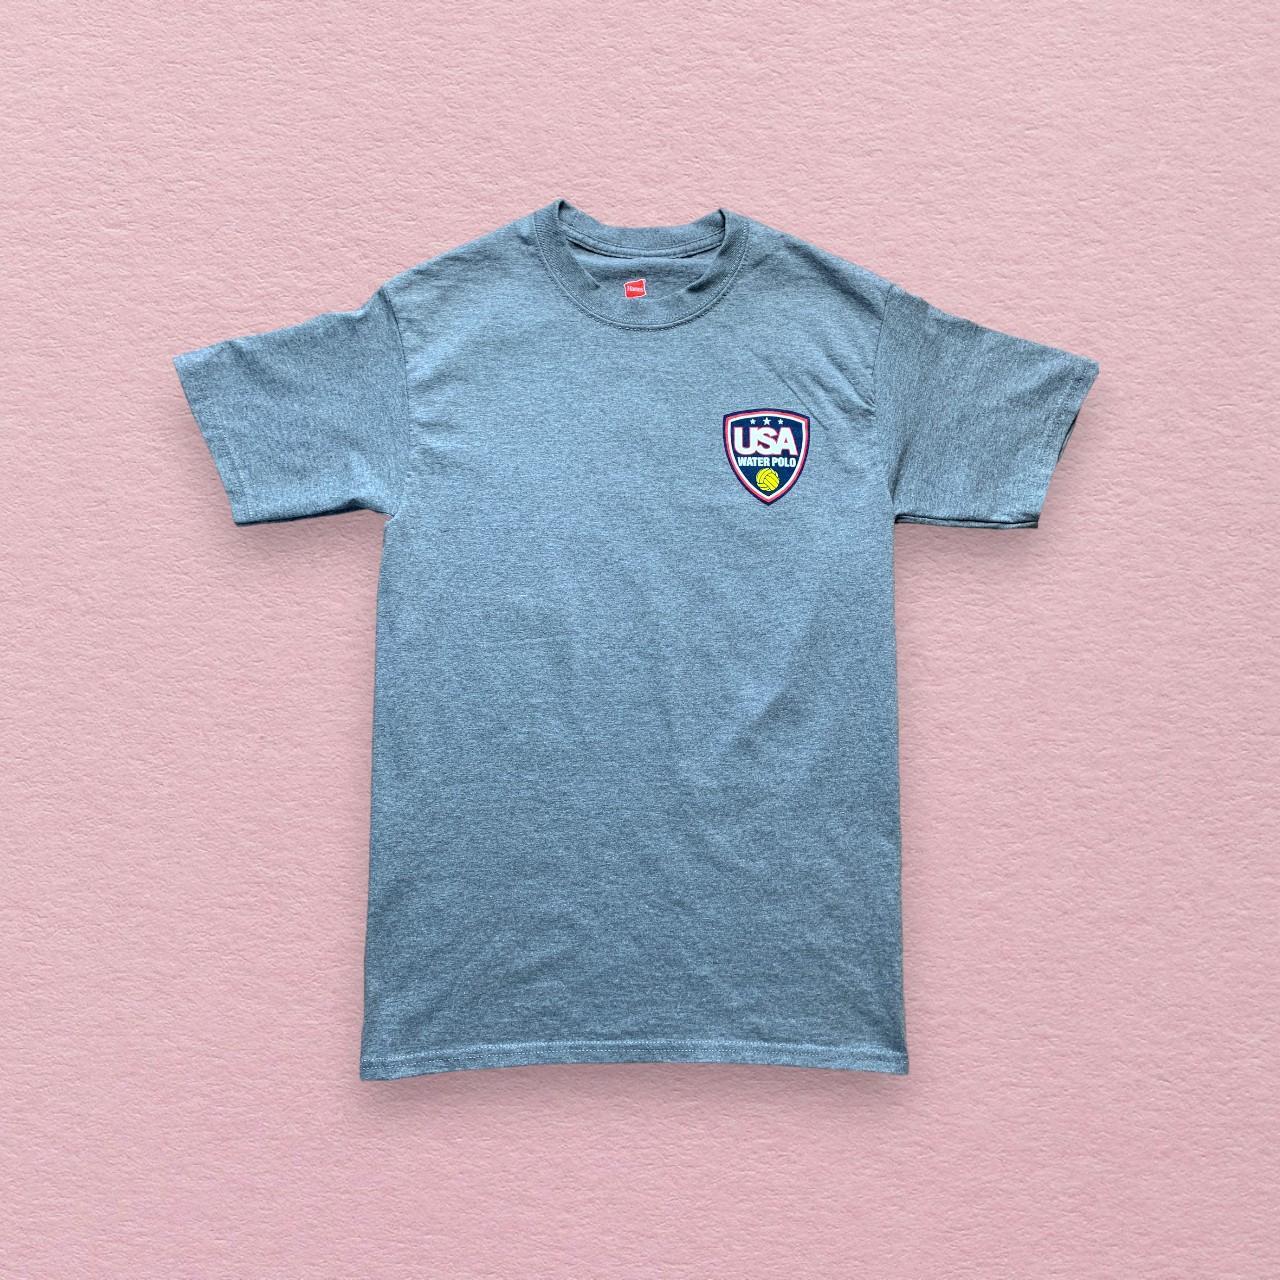 Small Grey USA Water Polo Tee with large Graphic on - Depop